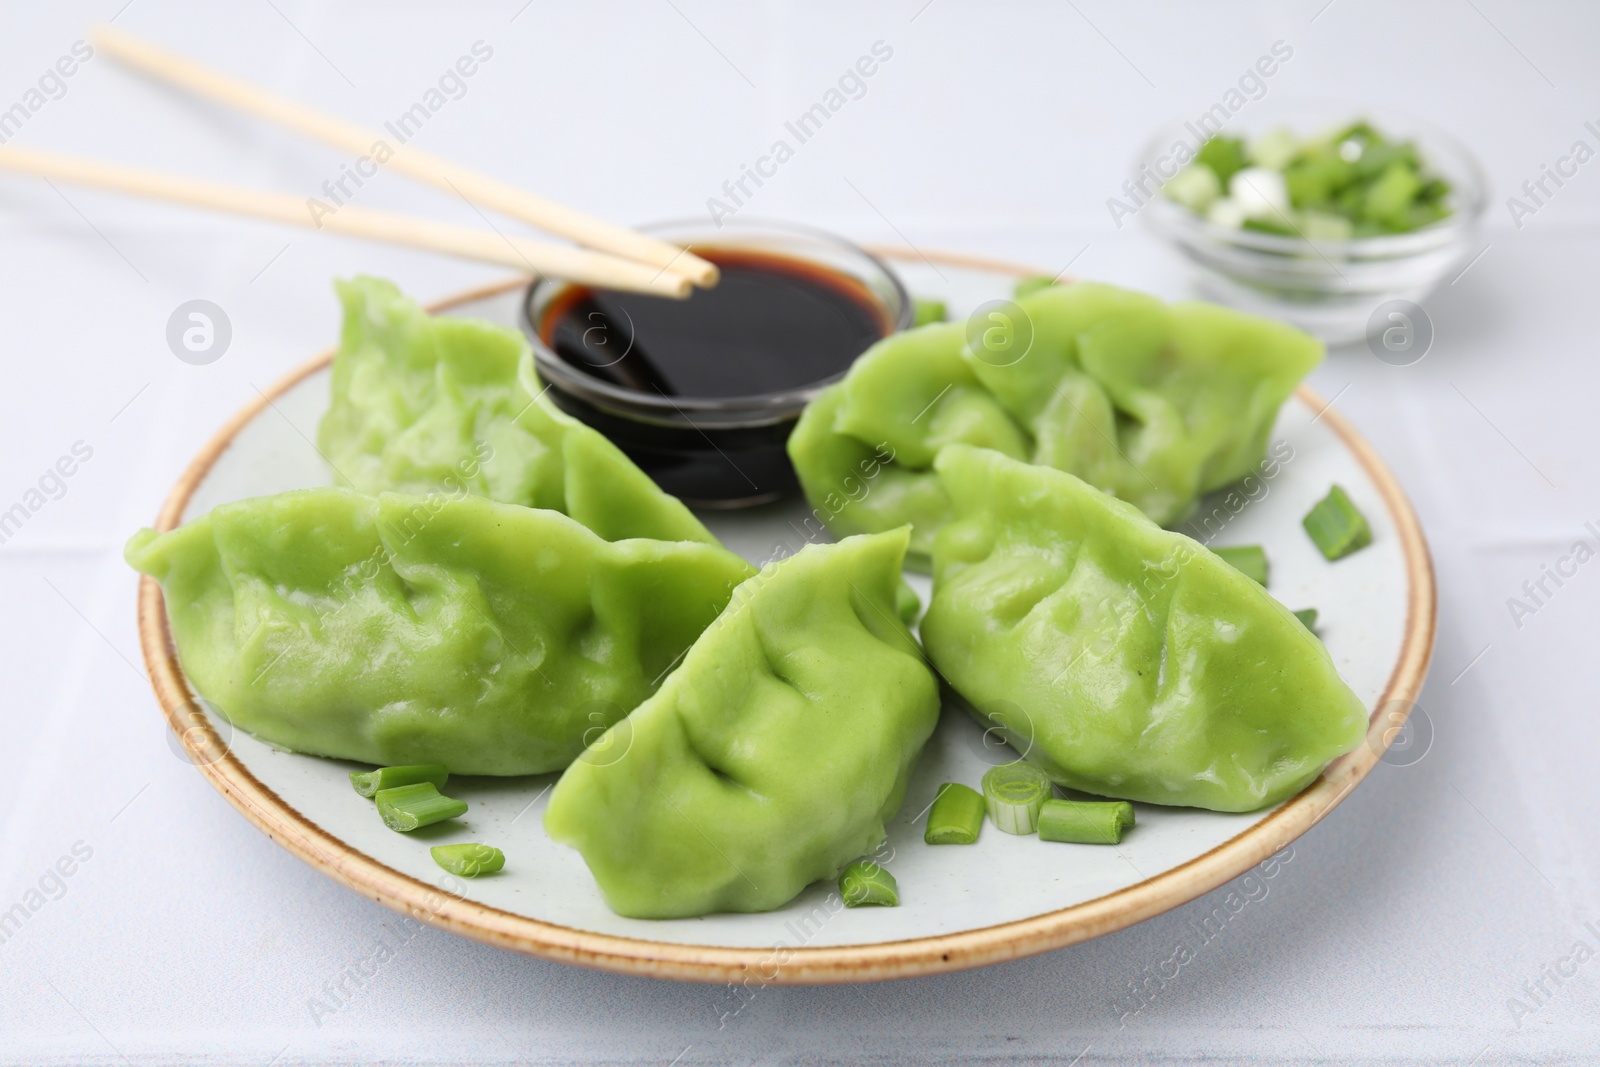 Photo of Delicious green dumplings (gyozas) with soy sauce served on white tiled table, closeup